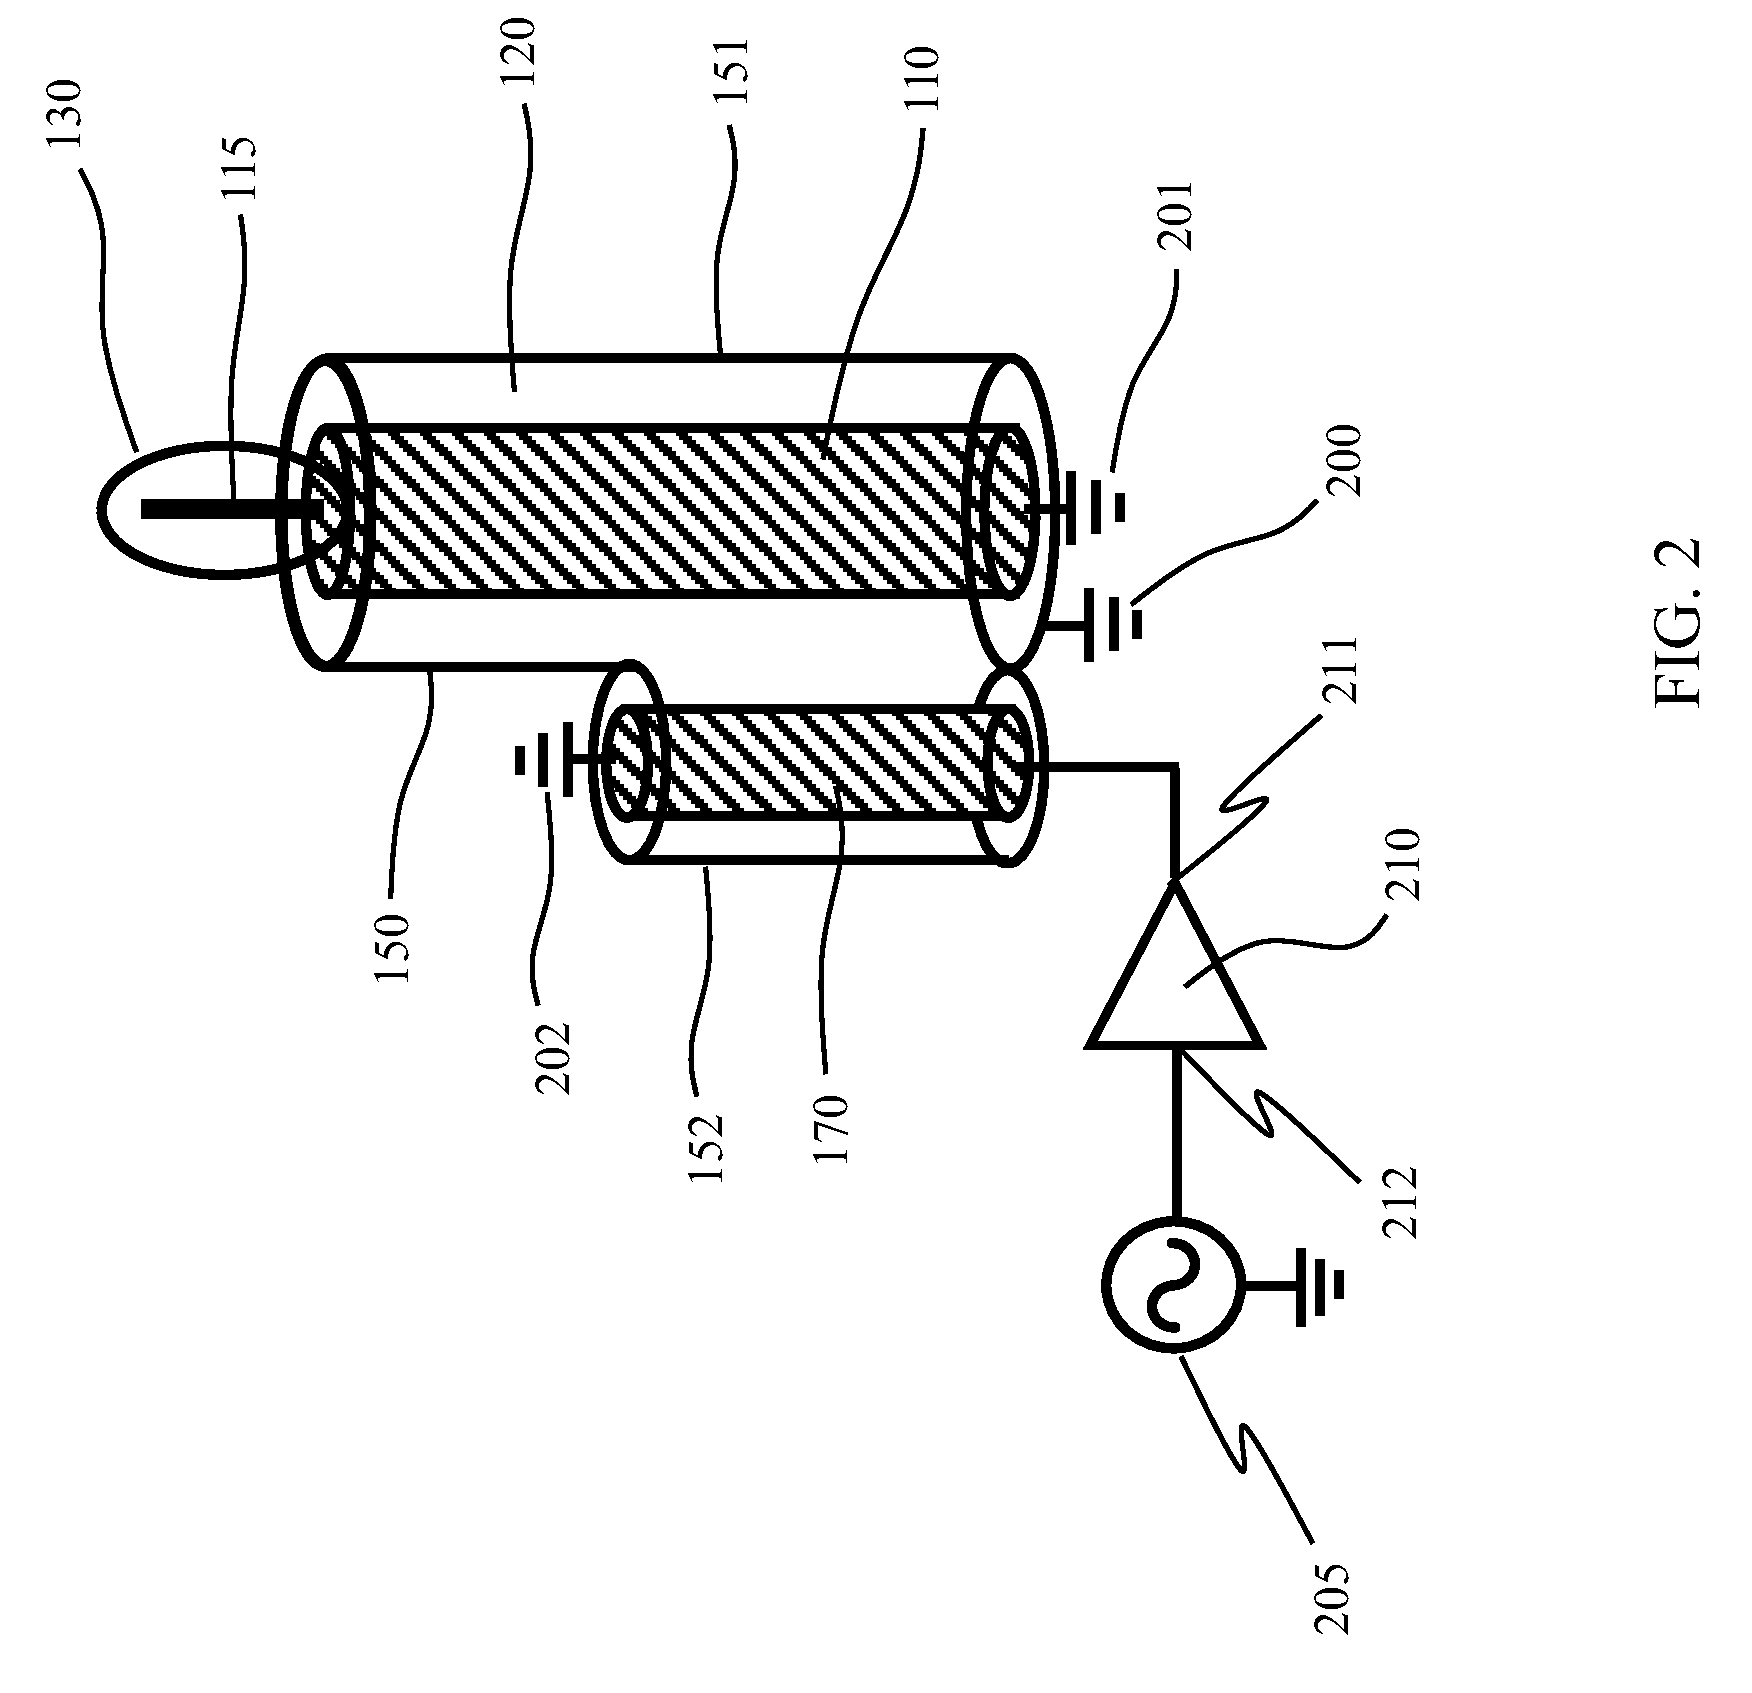 Electrodeless lamps with coaxial type resonators/waveguides and grounded coupling elements